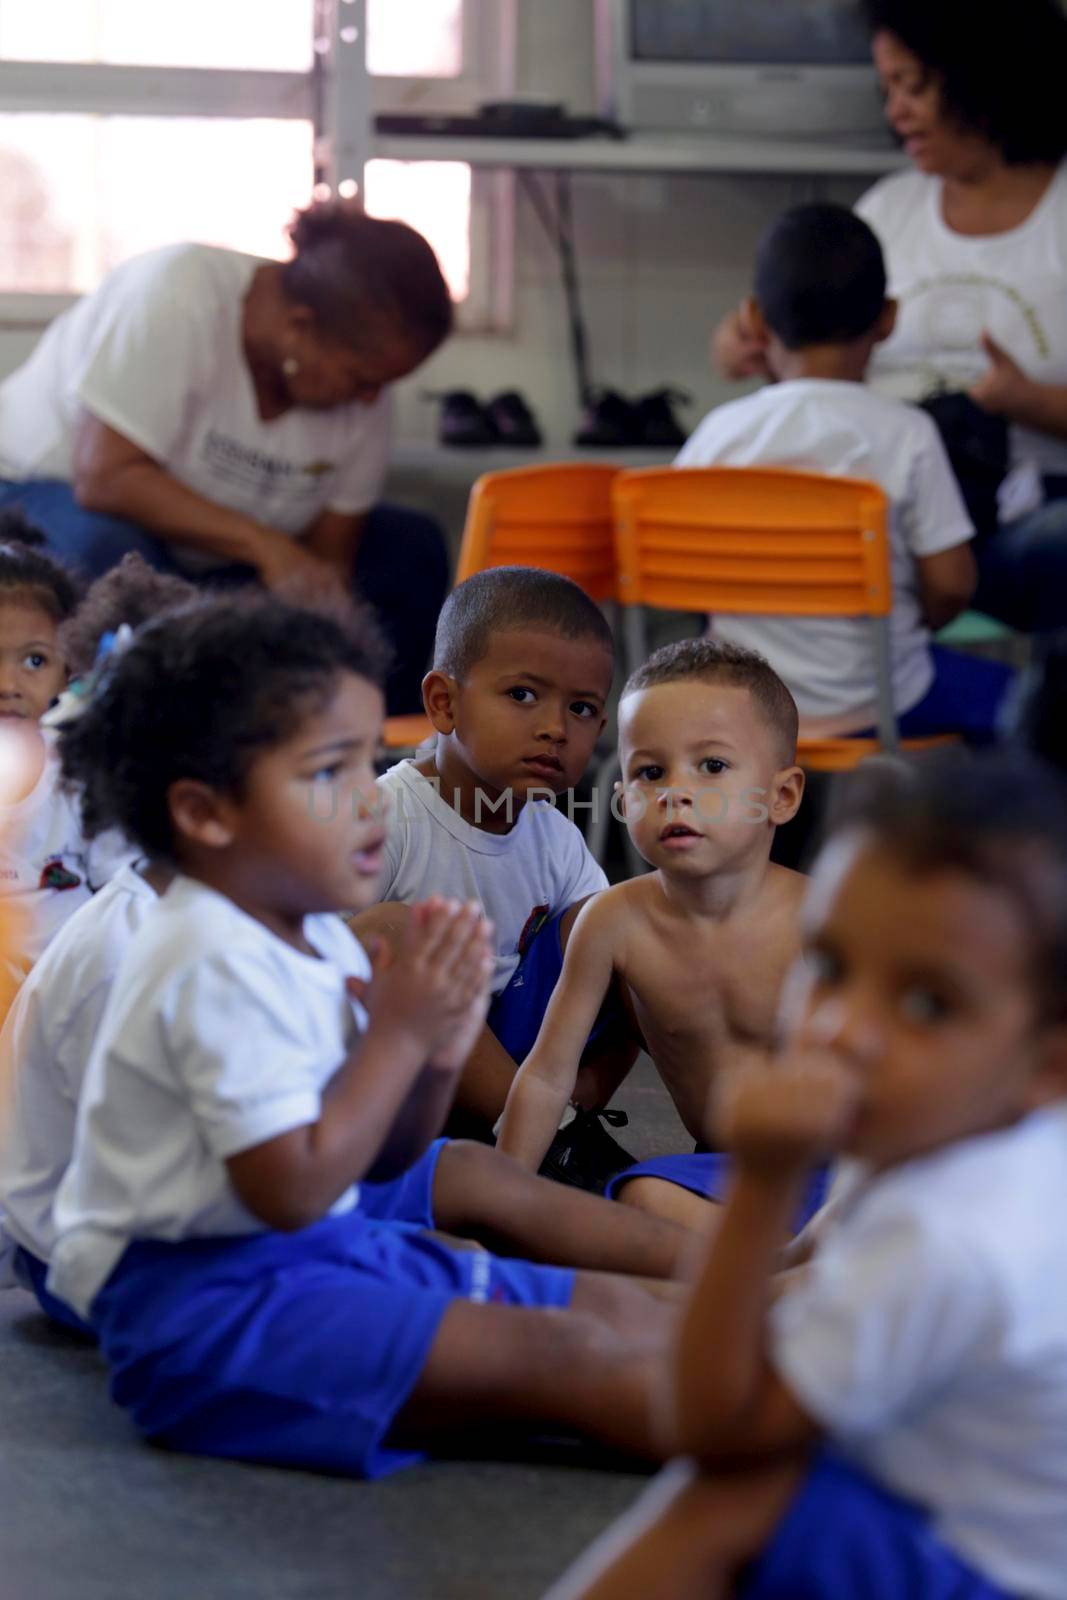 salvador, bahia, brazil - july 24, 2019: children are seen at a daycare center of the Bahia Military Police in the city of Salvador.